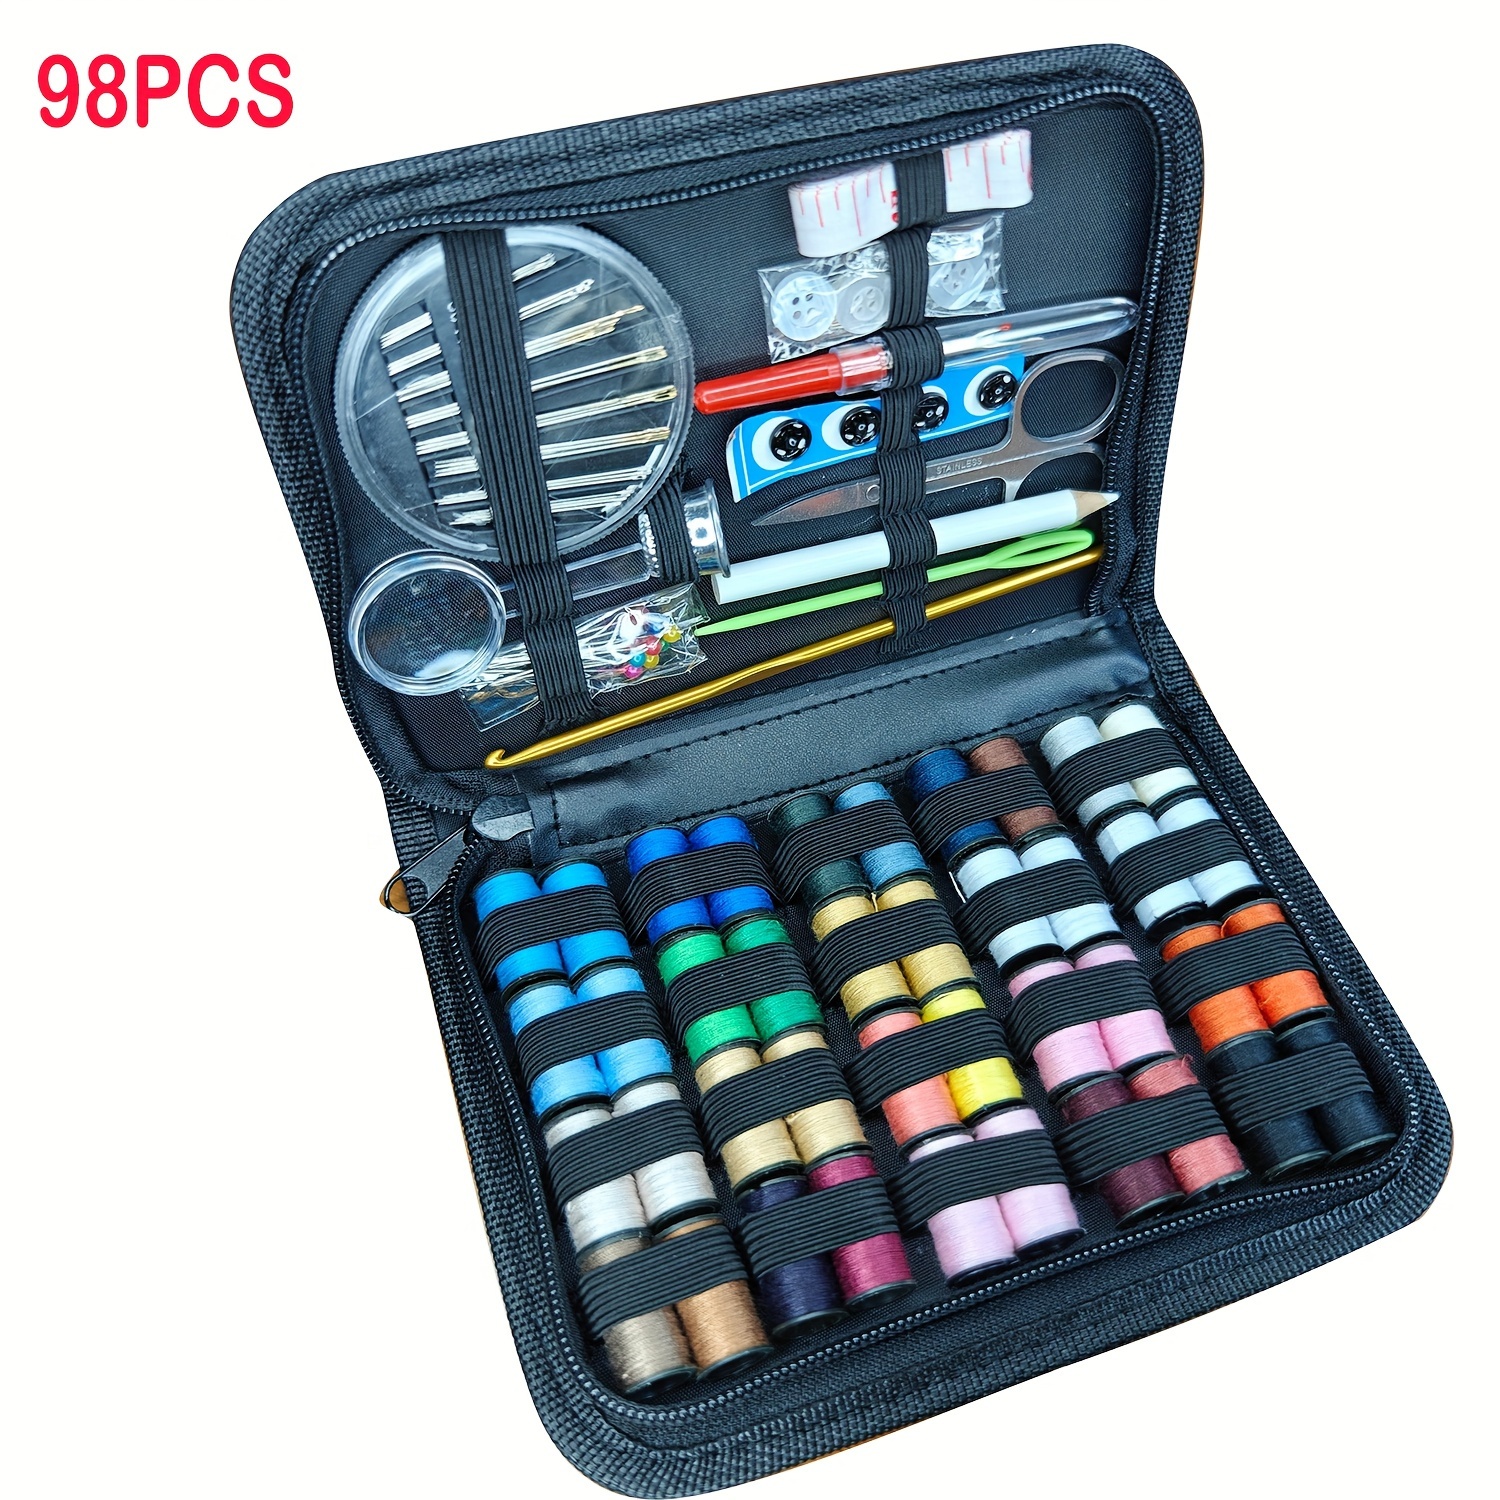 Sewing Kit, Complete Sewing Kit With Case, Portable Sewing Kit